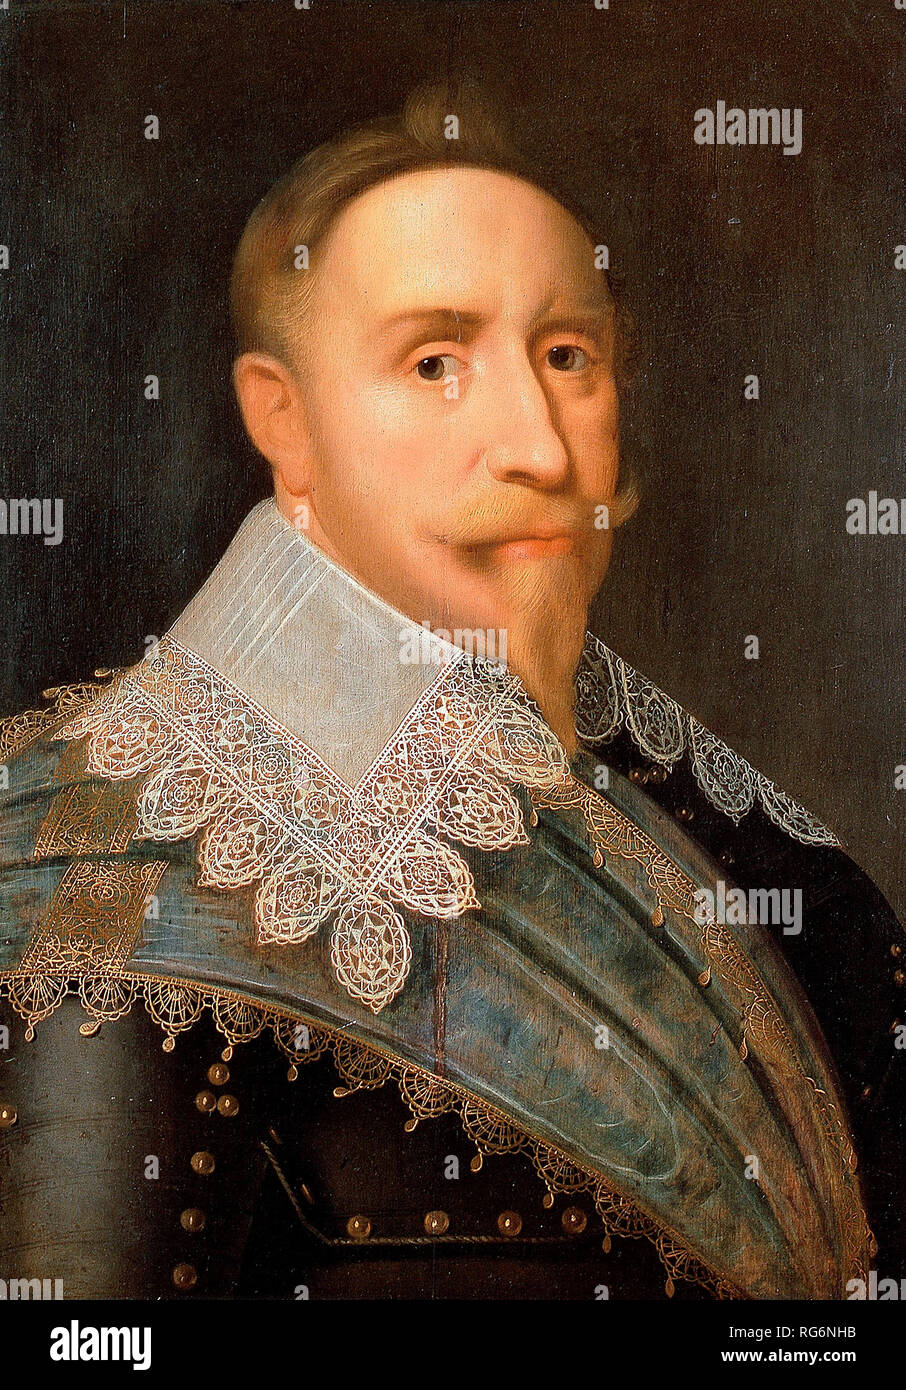 Gustavus Adolphus, King of Sweden 1611-1632 - Attributed to Jacob Hoefnager, 1624 Stock Photo